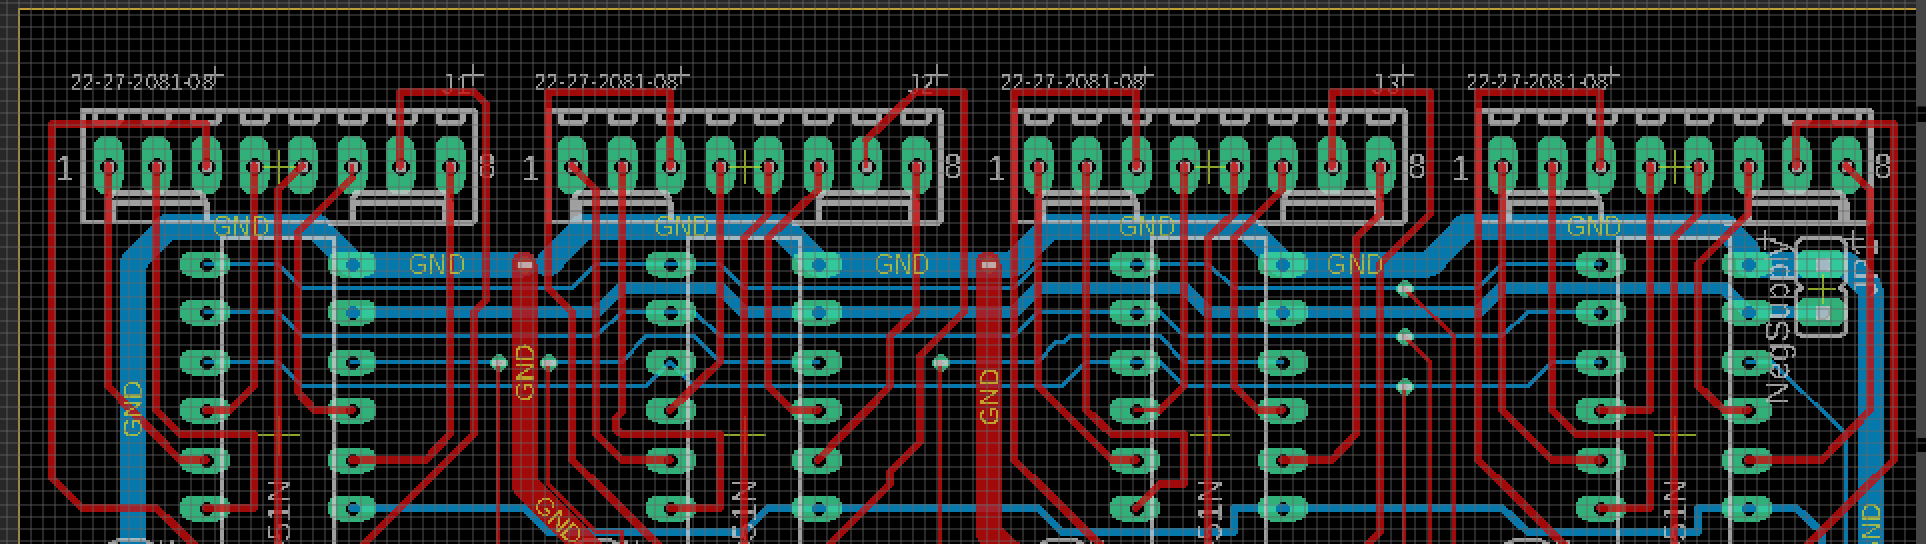 PCB layout in the CAD view, with red and blue transparent signal layers